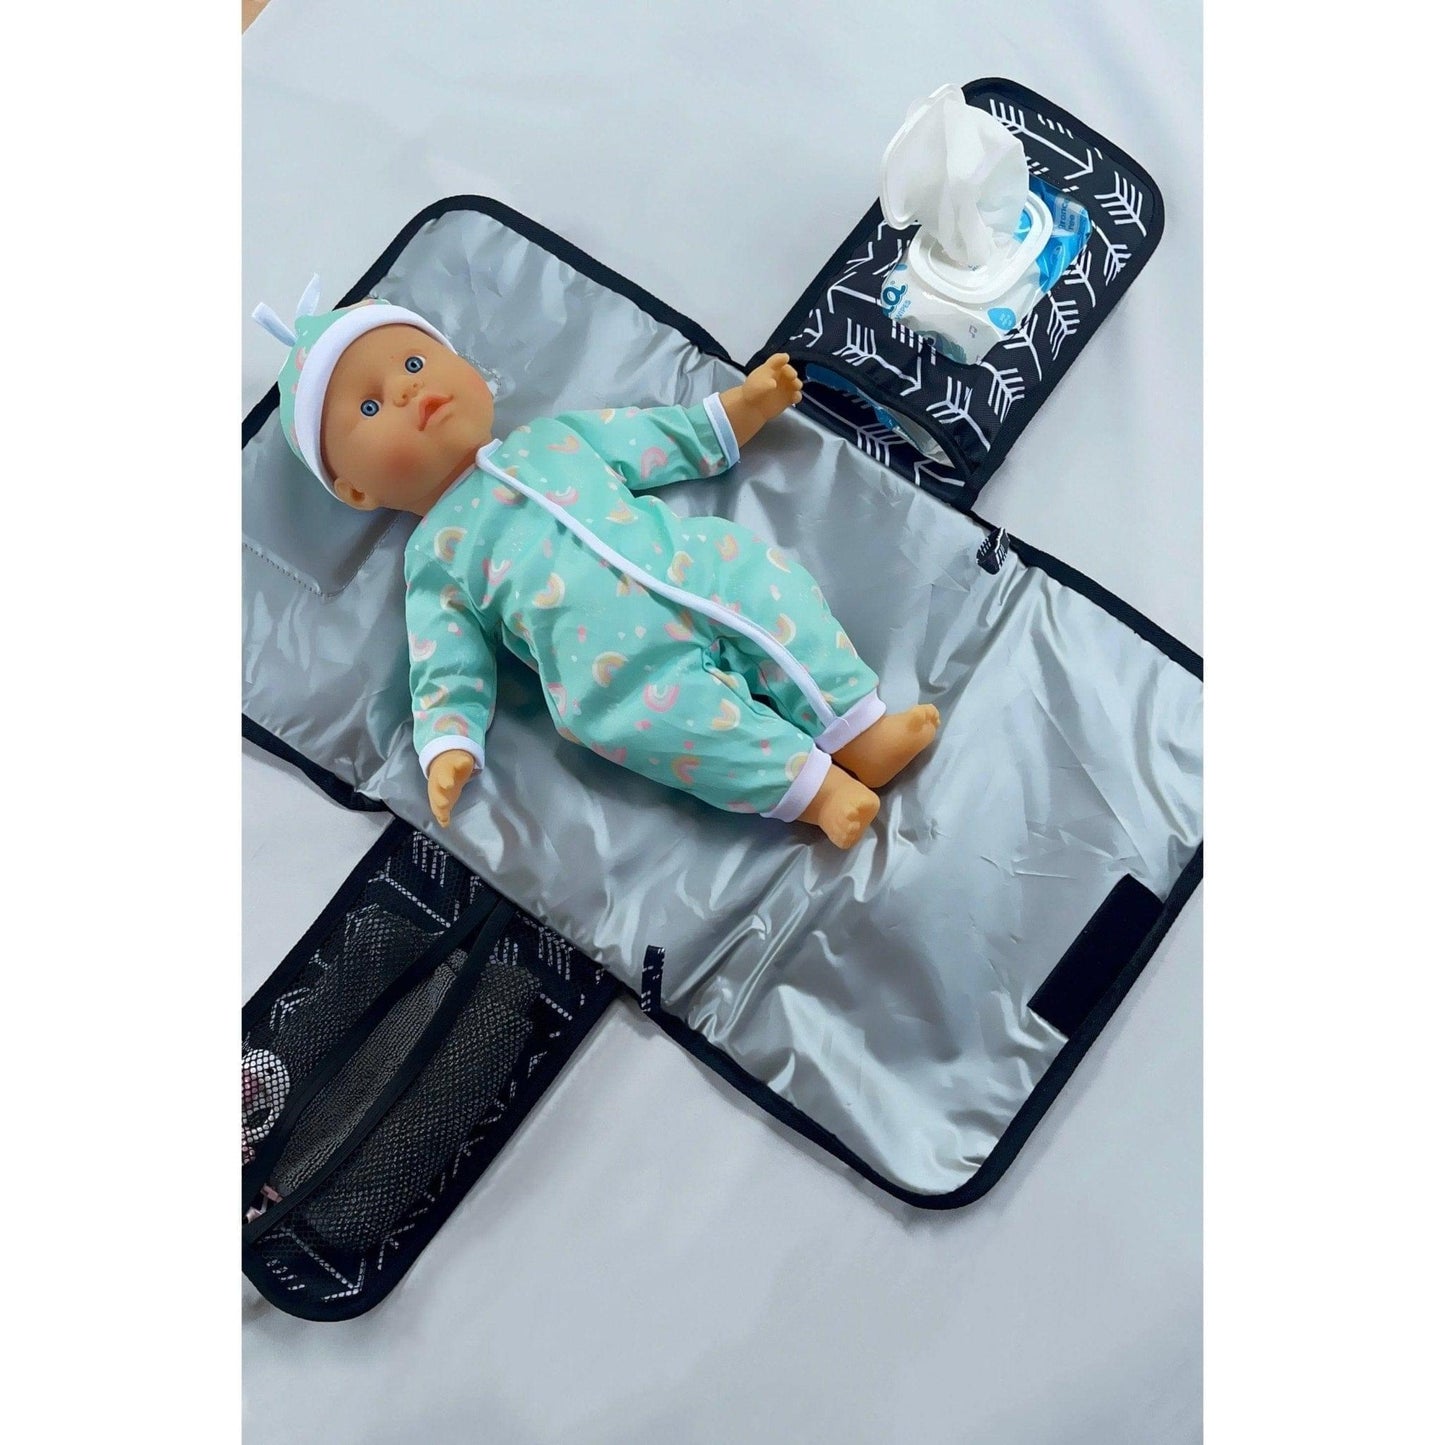 Portable baby bag and change mat all in one